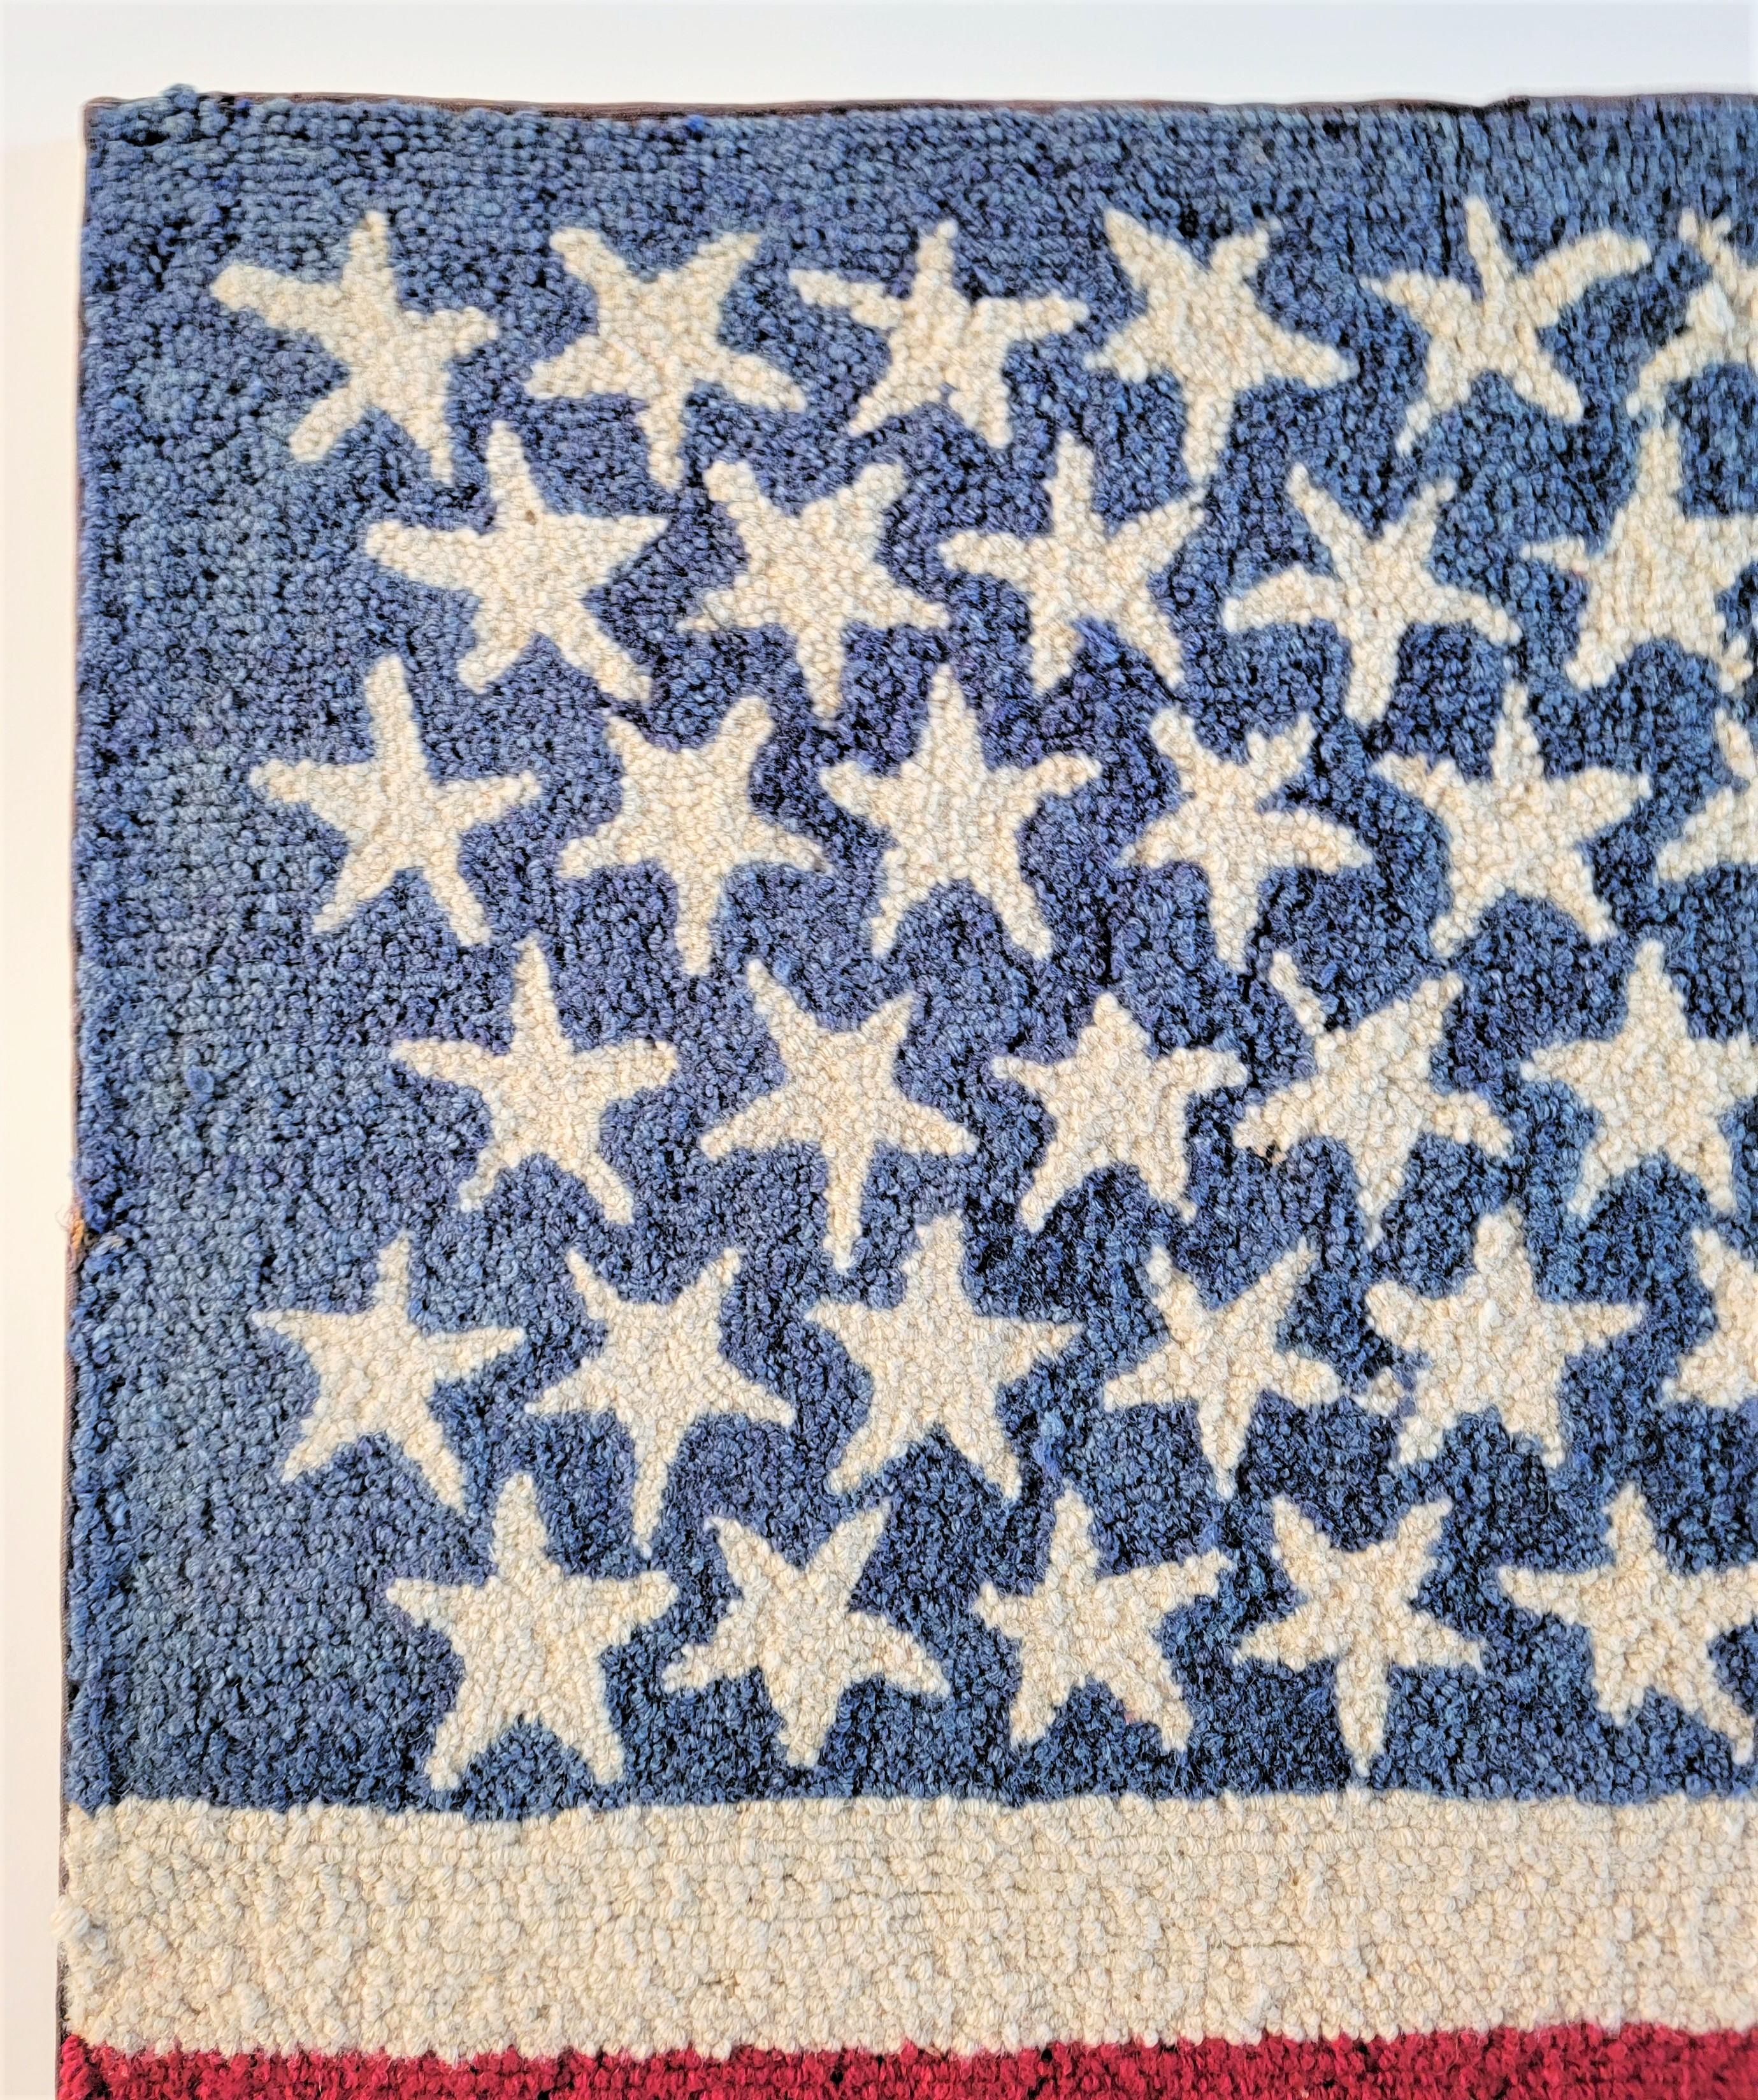 45 Star Mounted Crochet Hooked Rug, Large In Excellent Condition For Sale In Los Angeles, CA